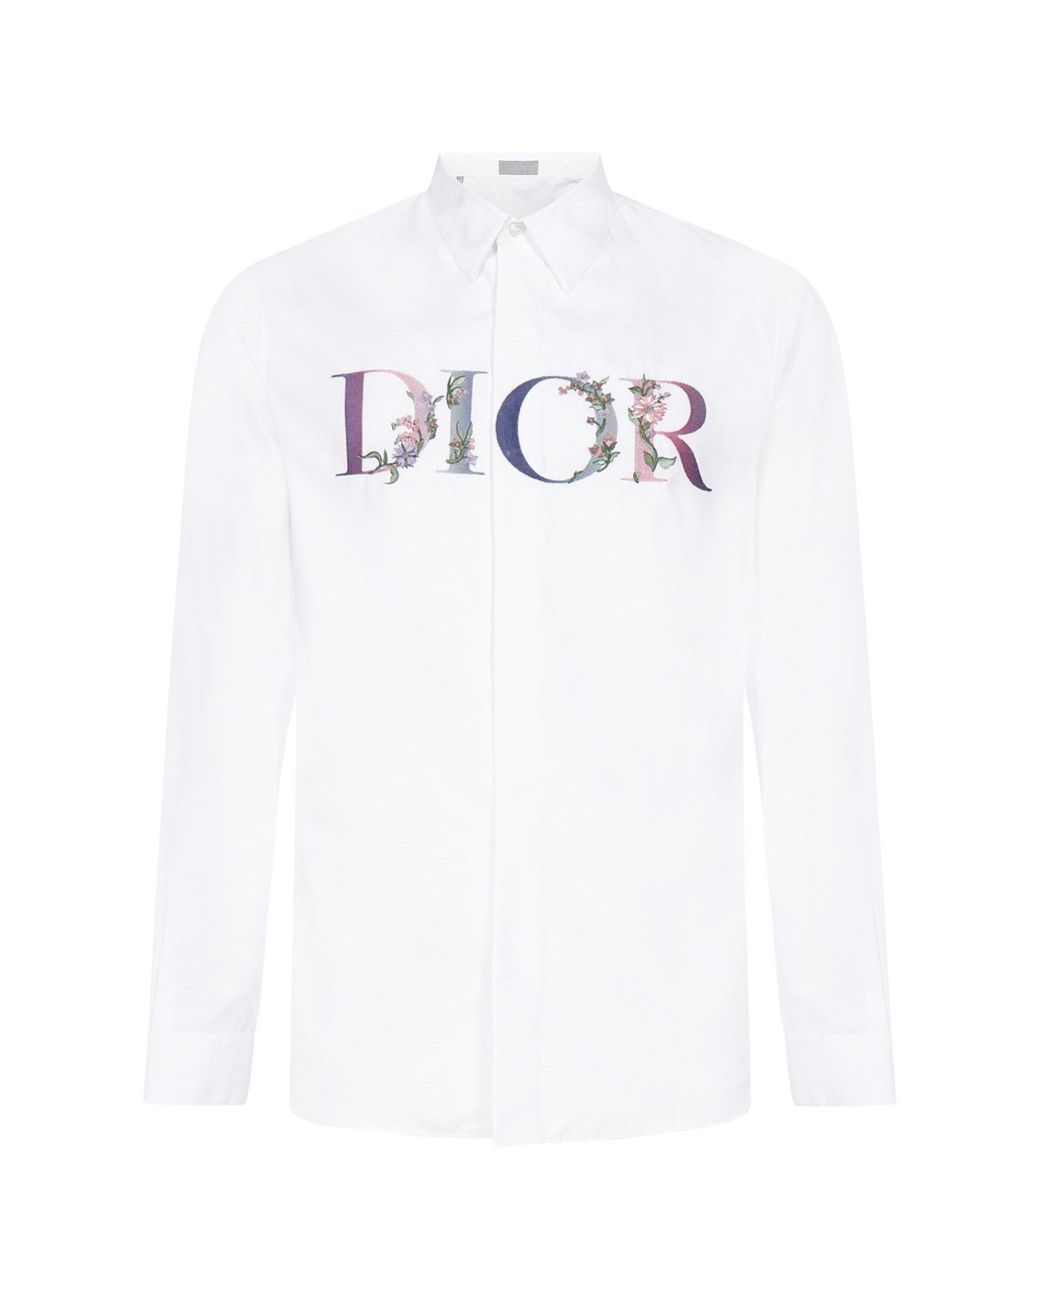 Dior Cotton Flowers Shirt in White for Men - Lyst